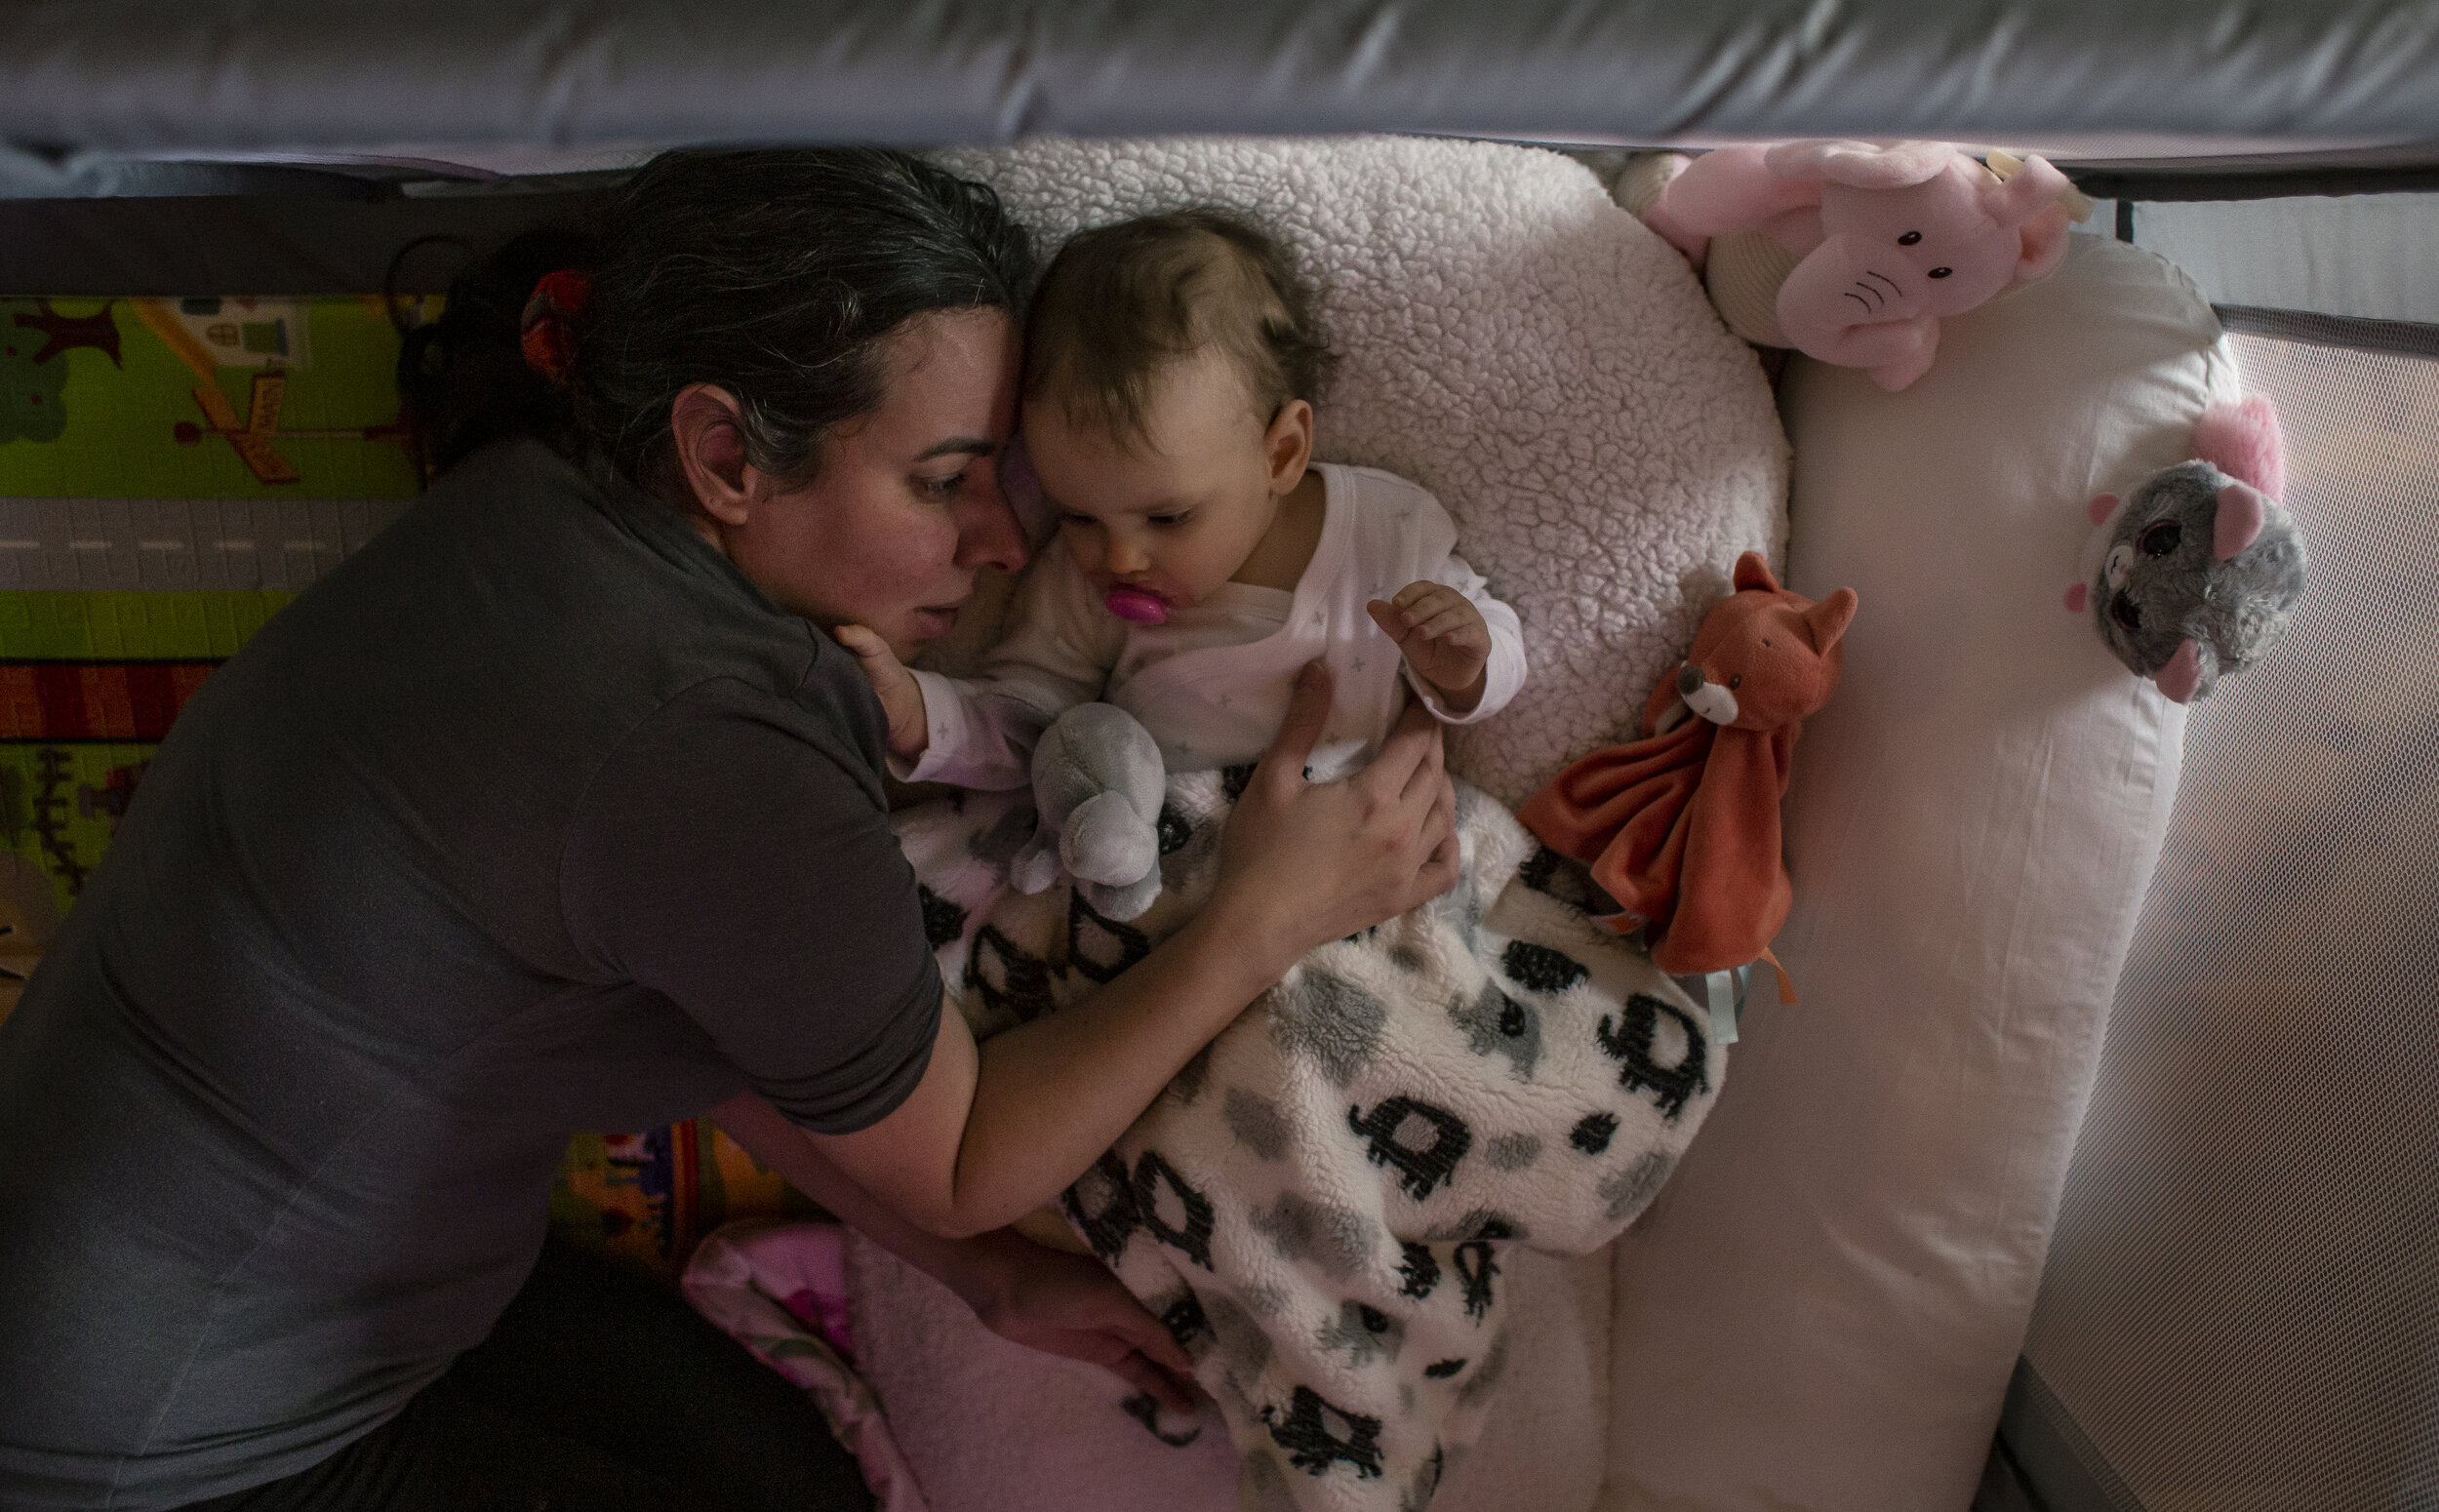  Isadora has separation anxiety when apart from her mother and has a very difficult time sleeping, making putting her down for bed often a laborious process. Souza lays next to her in her play pen and sings her a lullaby in Portuguese to help her fal